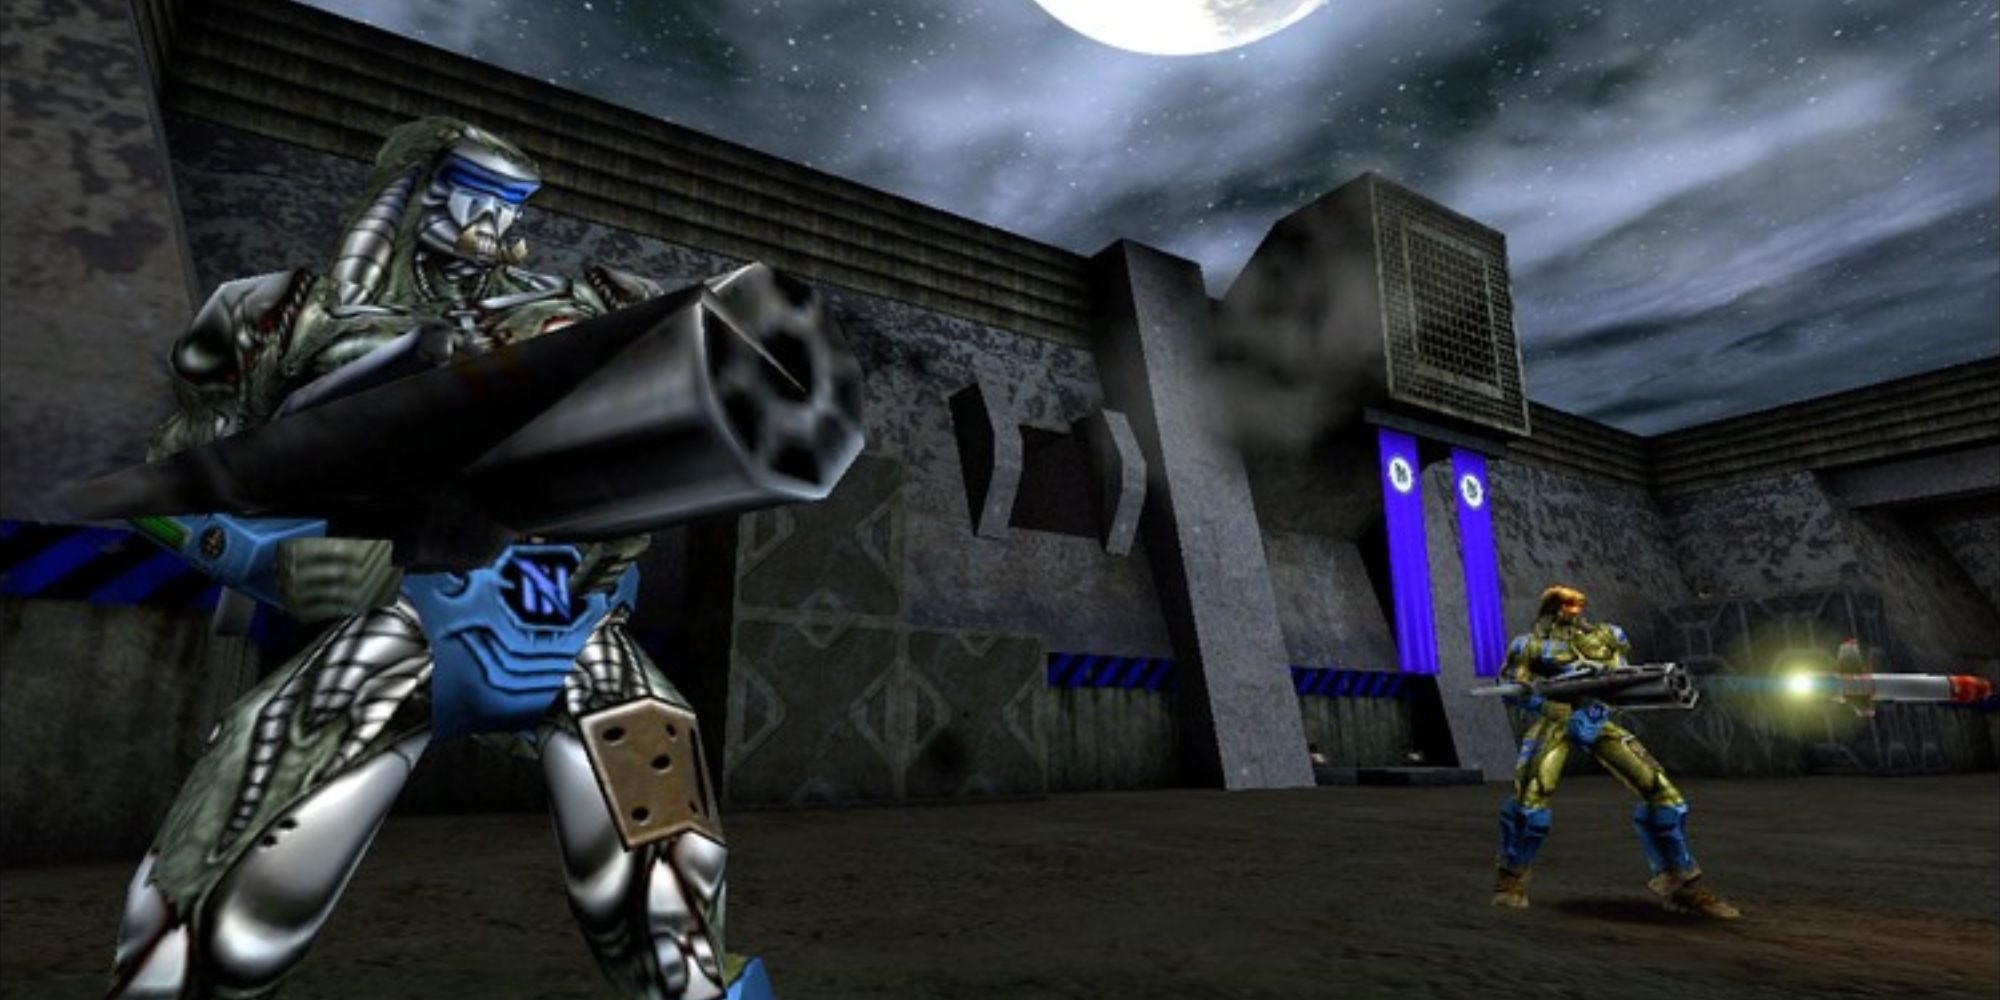 90s FPS a wide shot from the game Unreal Tournament of two Dominators firing various weapons at enemies off screen against a dark and gloomy backdrop of an industrial building